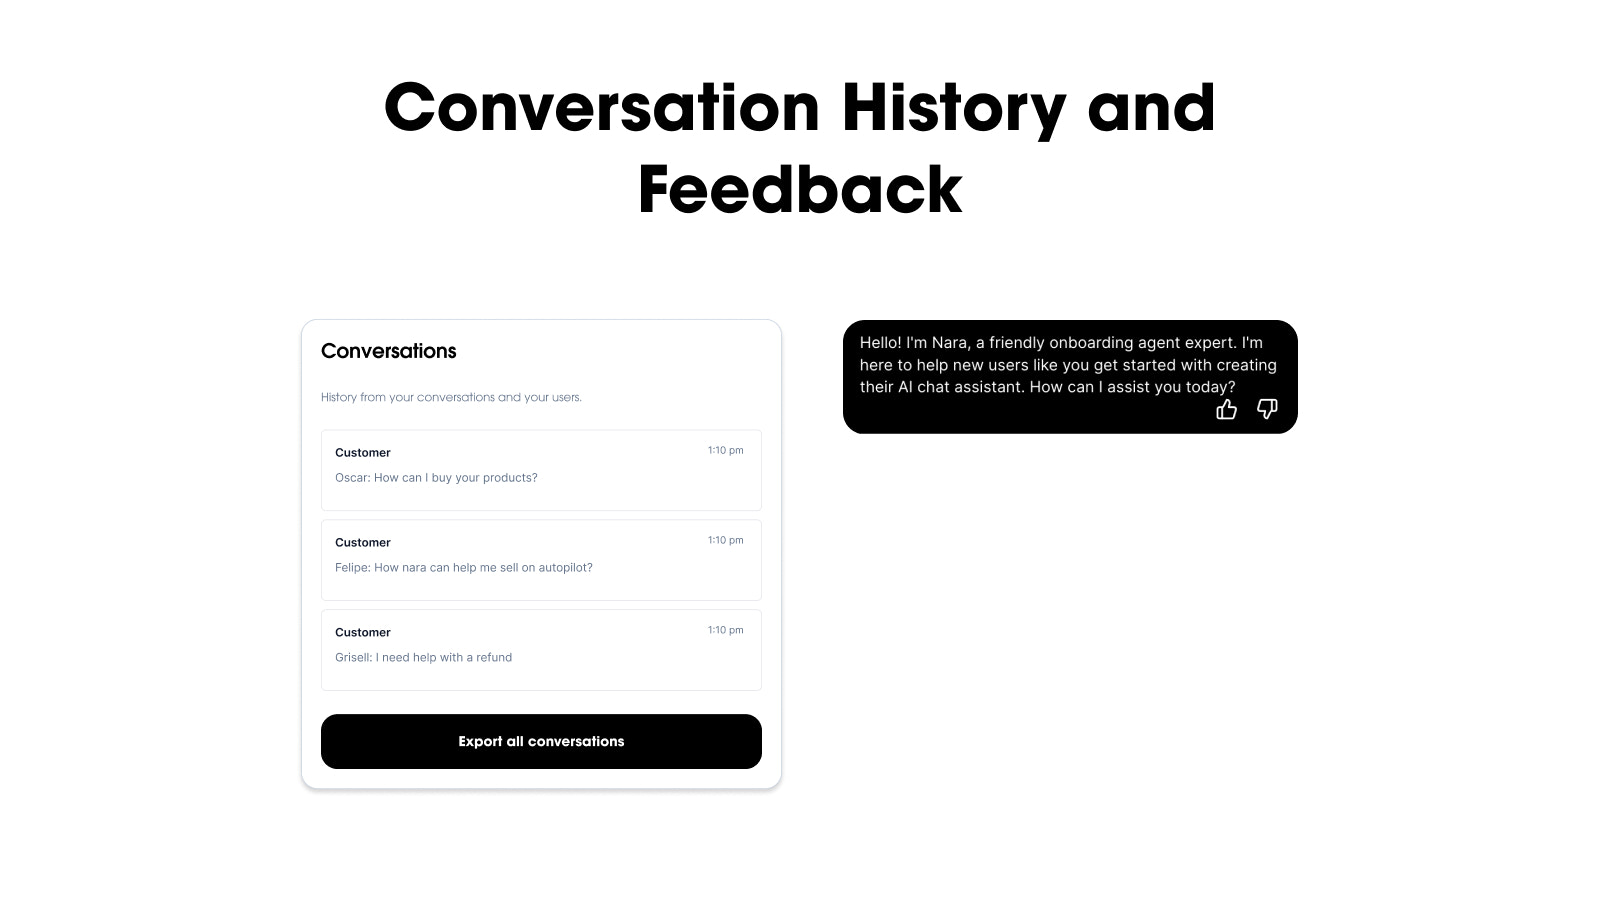 Image of Conversation History and Feedback feature